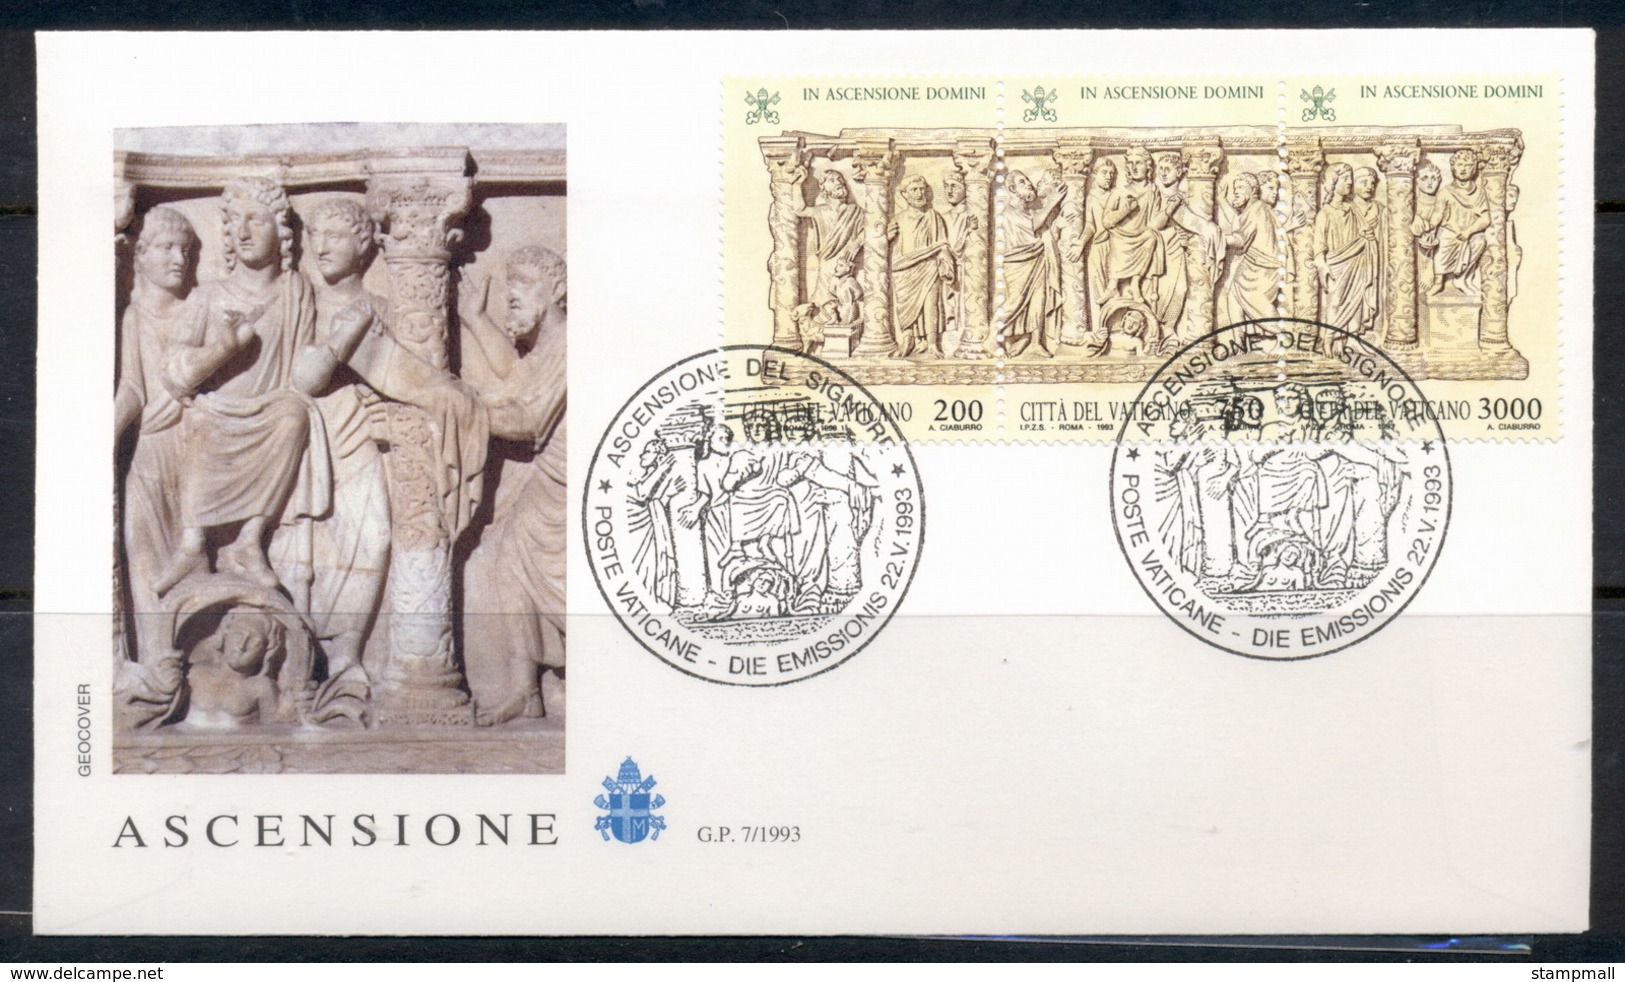 Vatican 1993 Ascension Day FDC - FDC